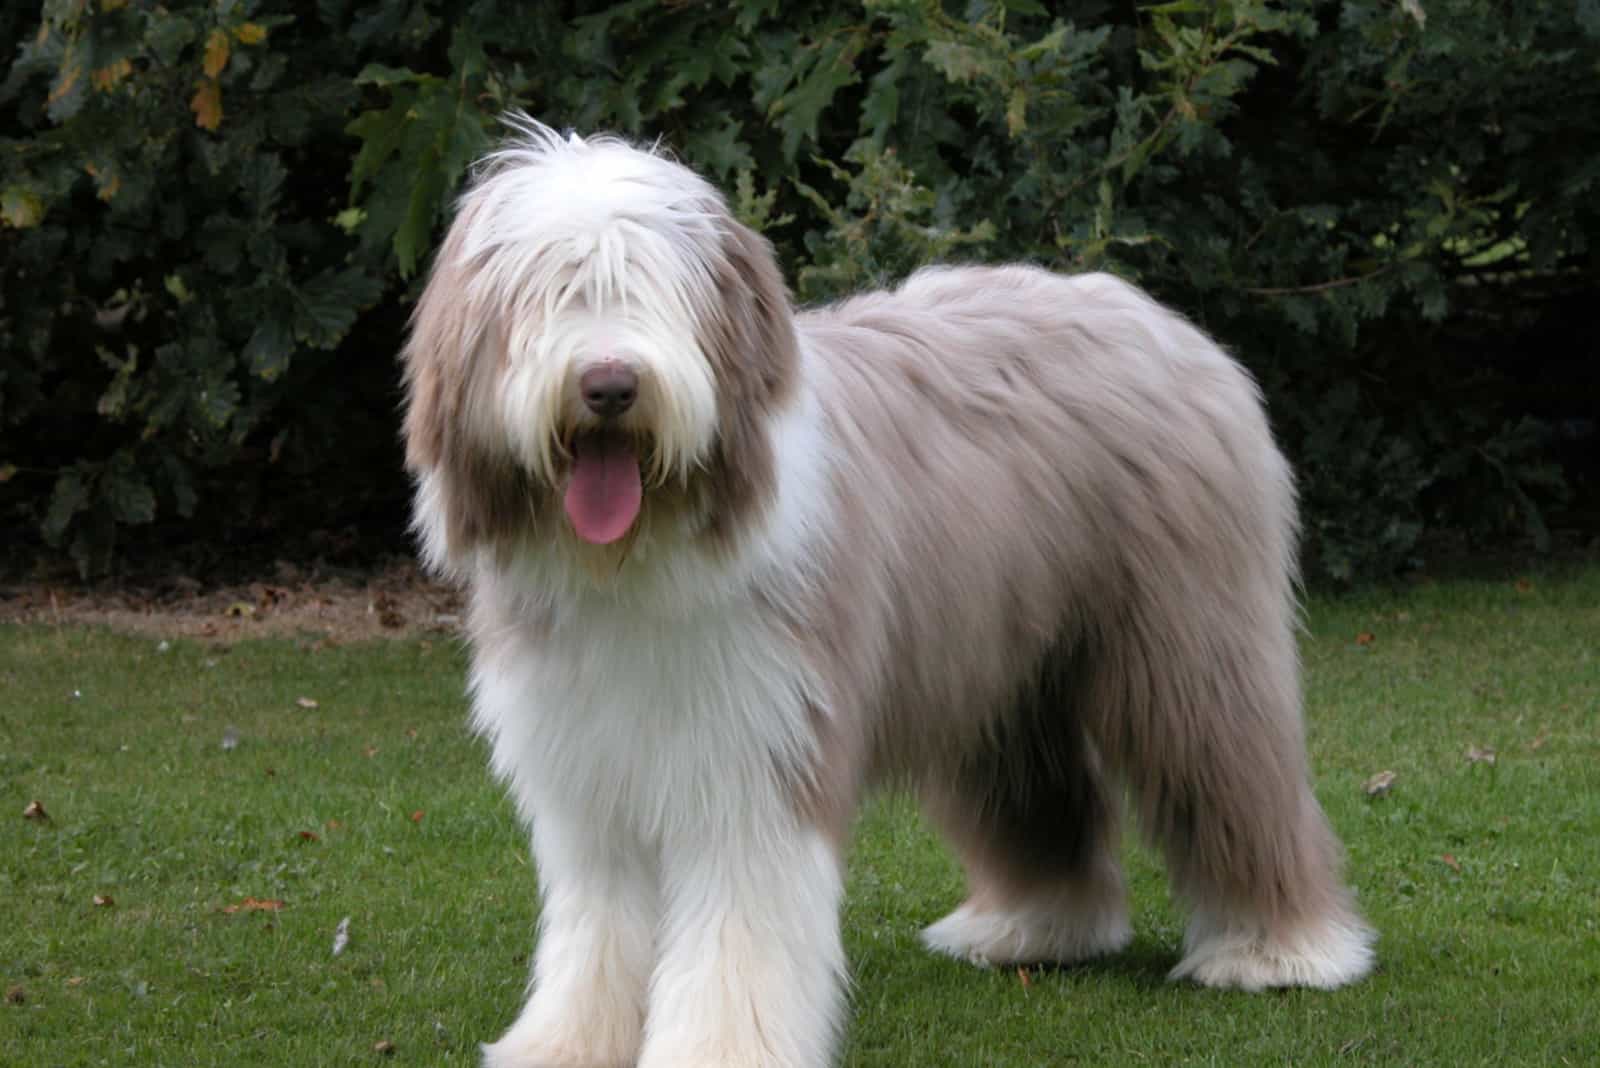 Bearded Collie is standing on the grass